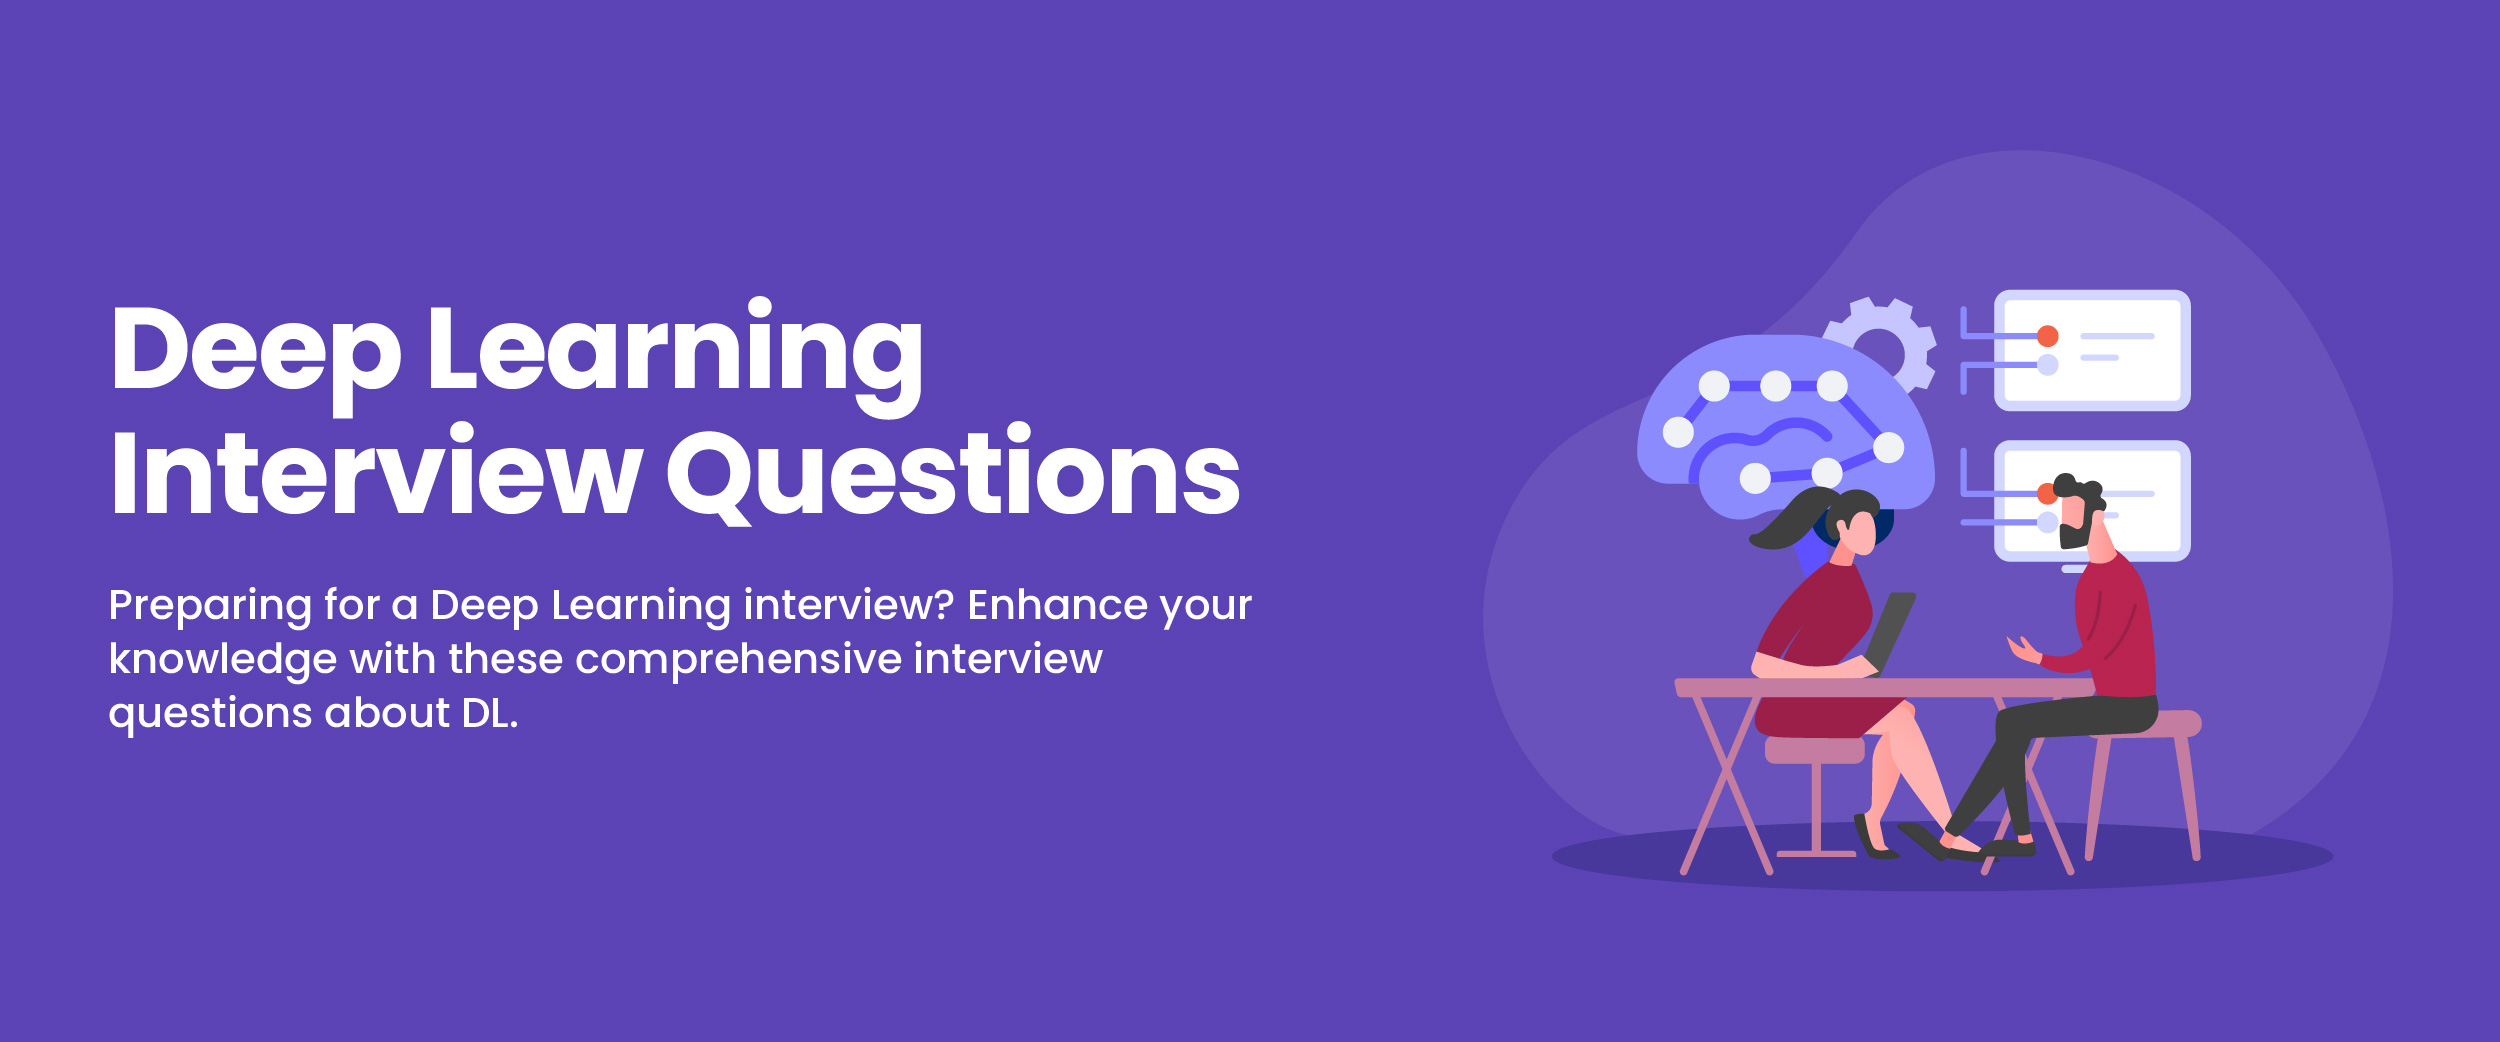 Deep learning interview questions